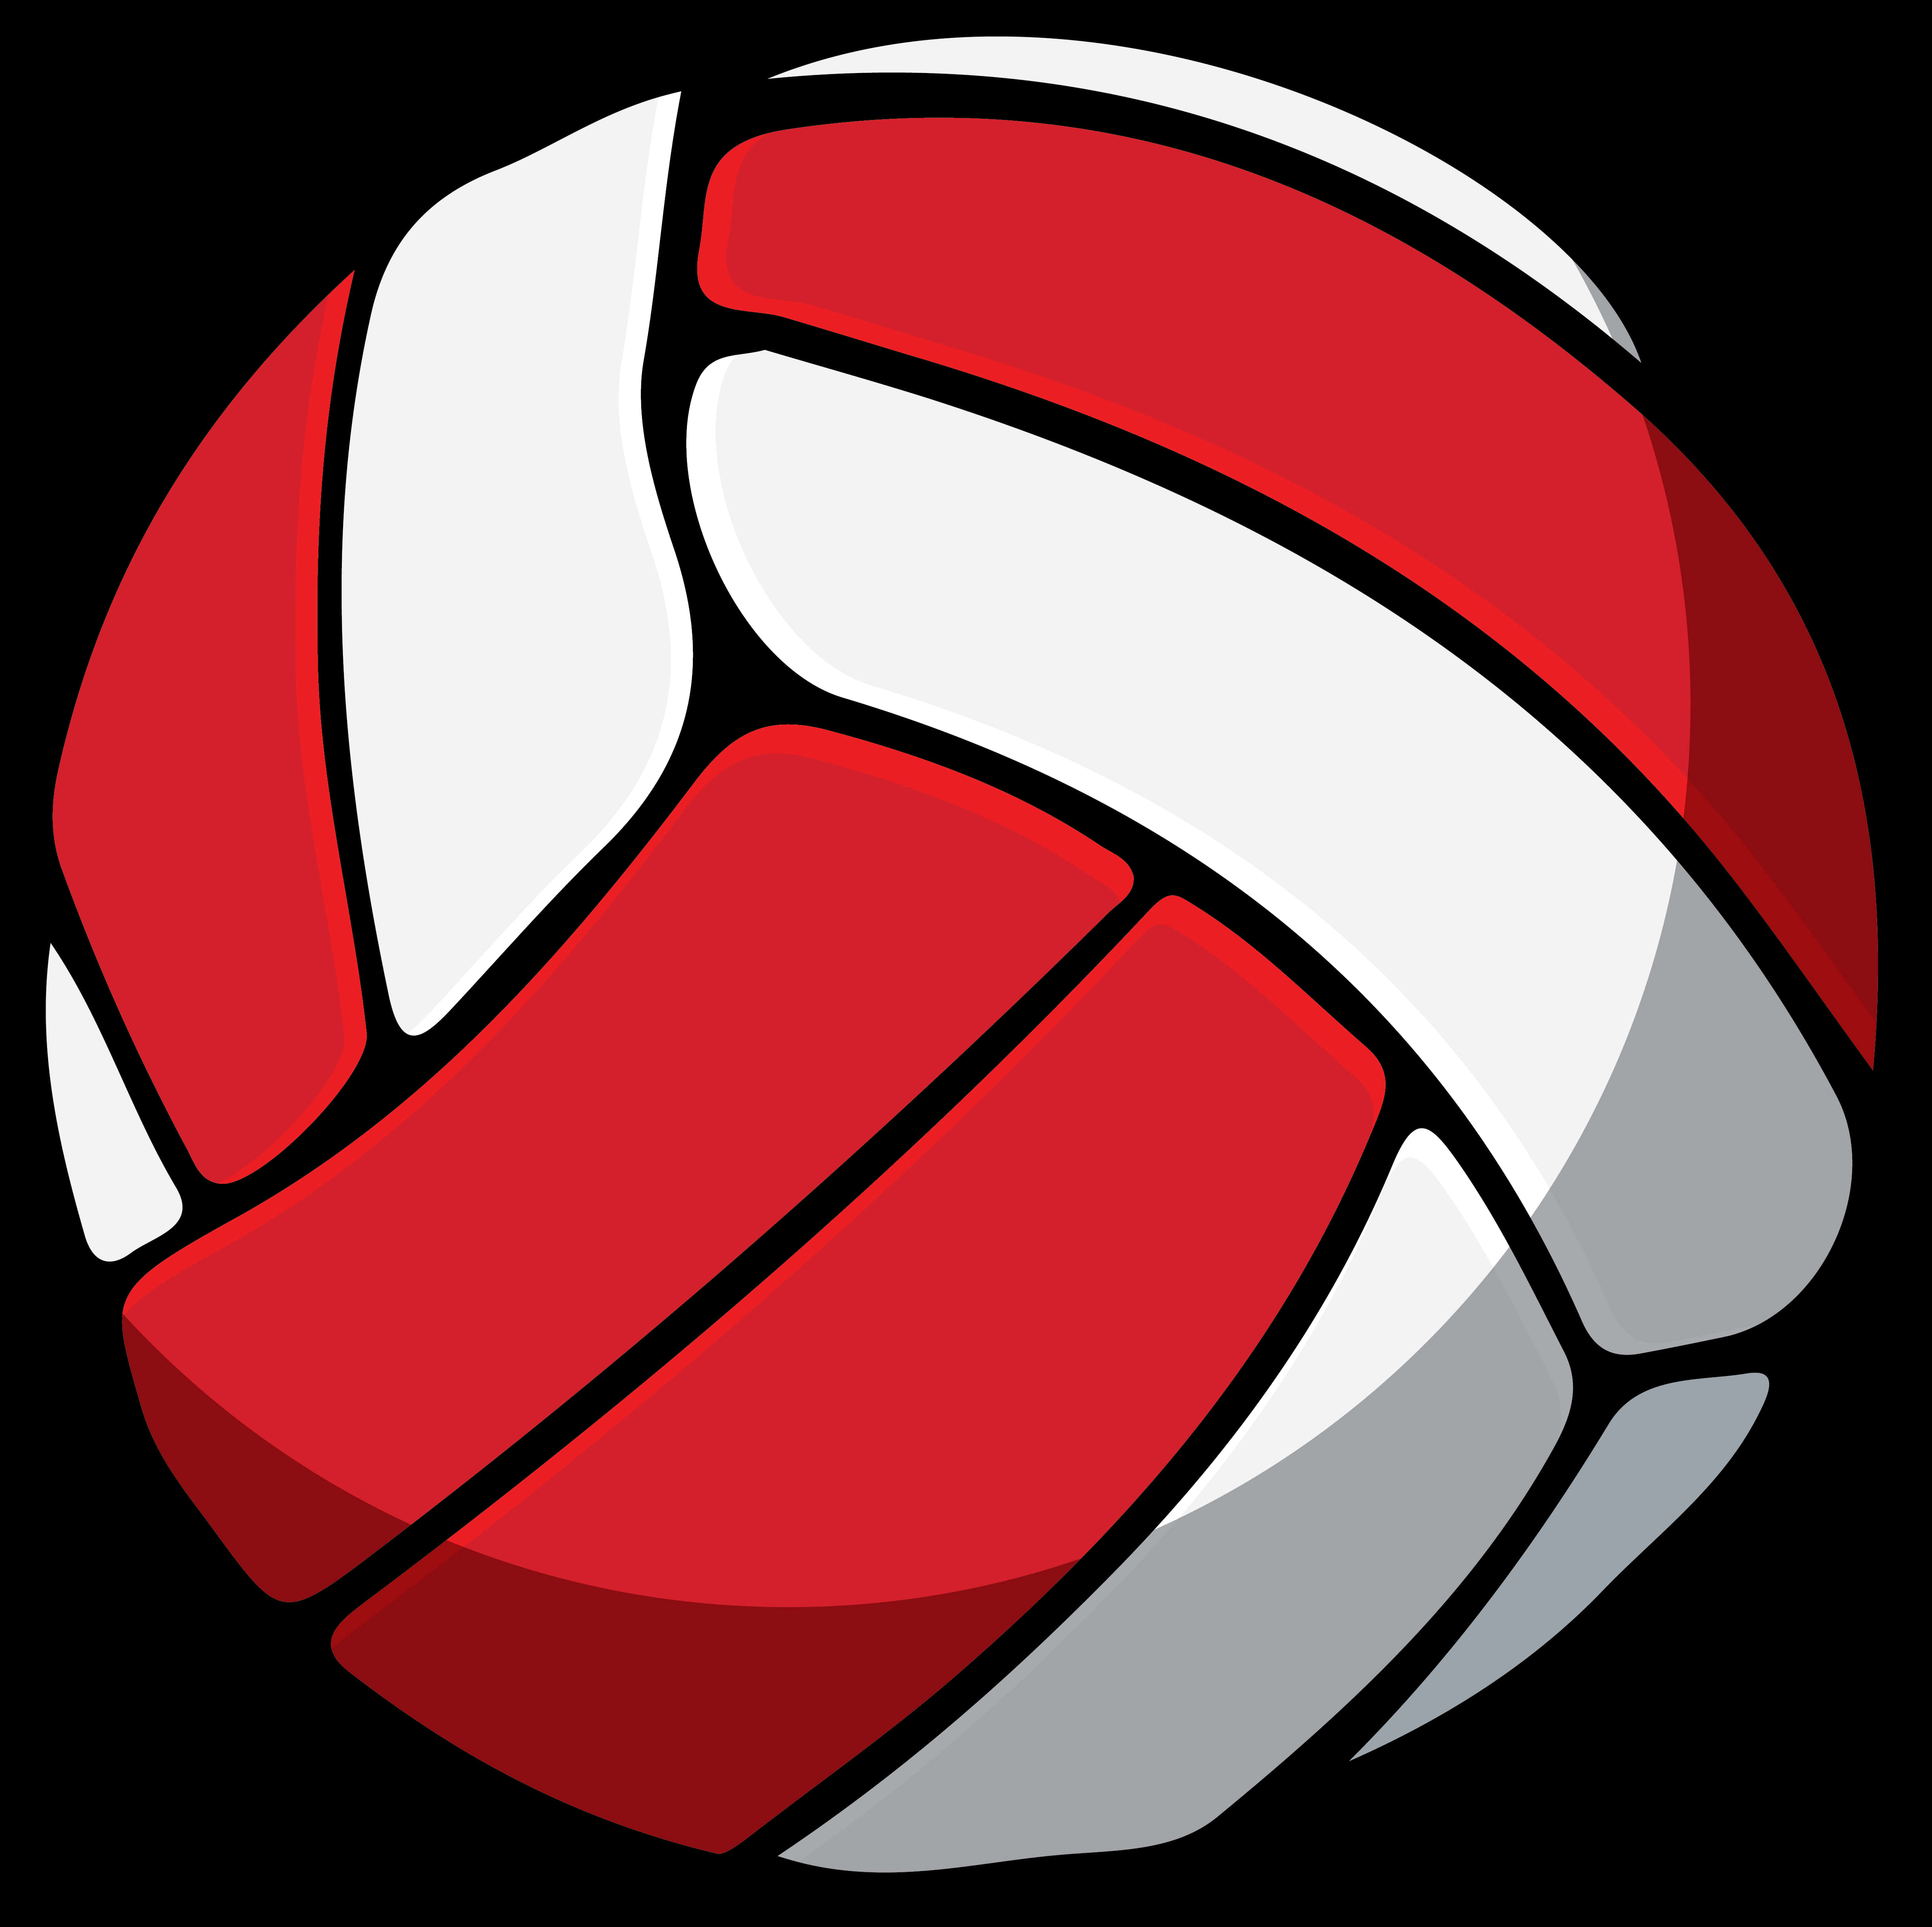 Stylized Volleyball Graphic PNG